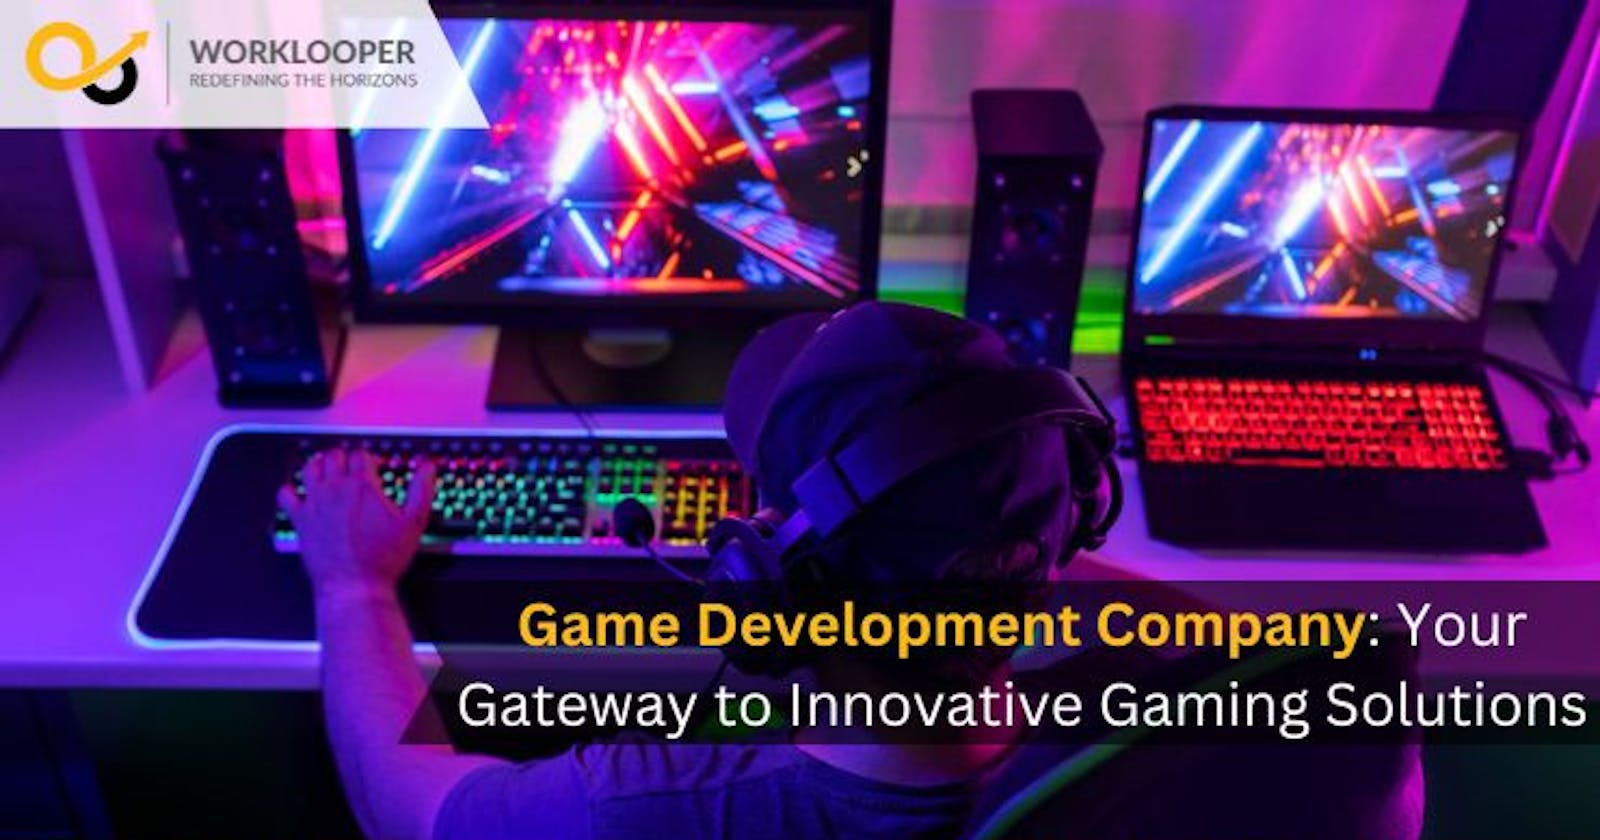 Game Development Company: Your Gateway to Innovative Gaming Solutions